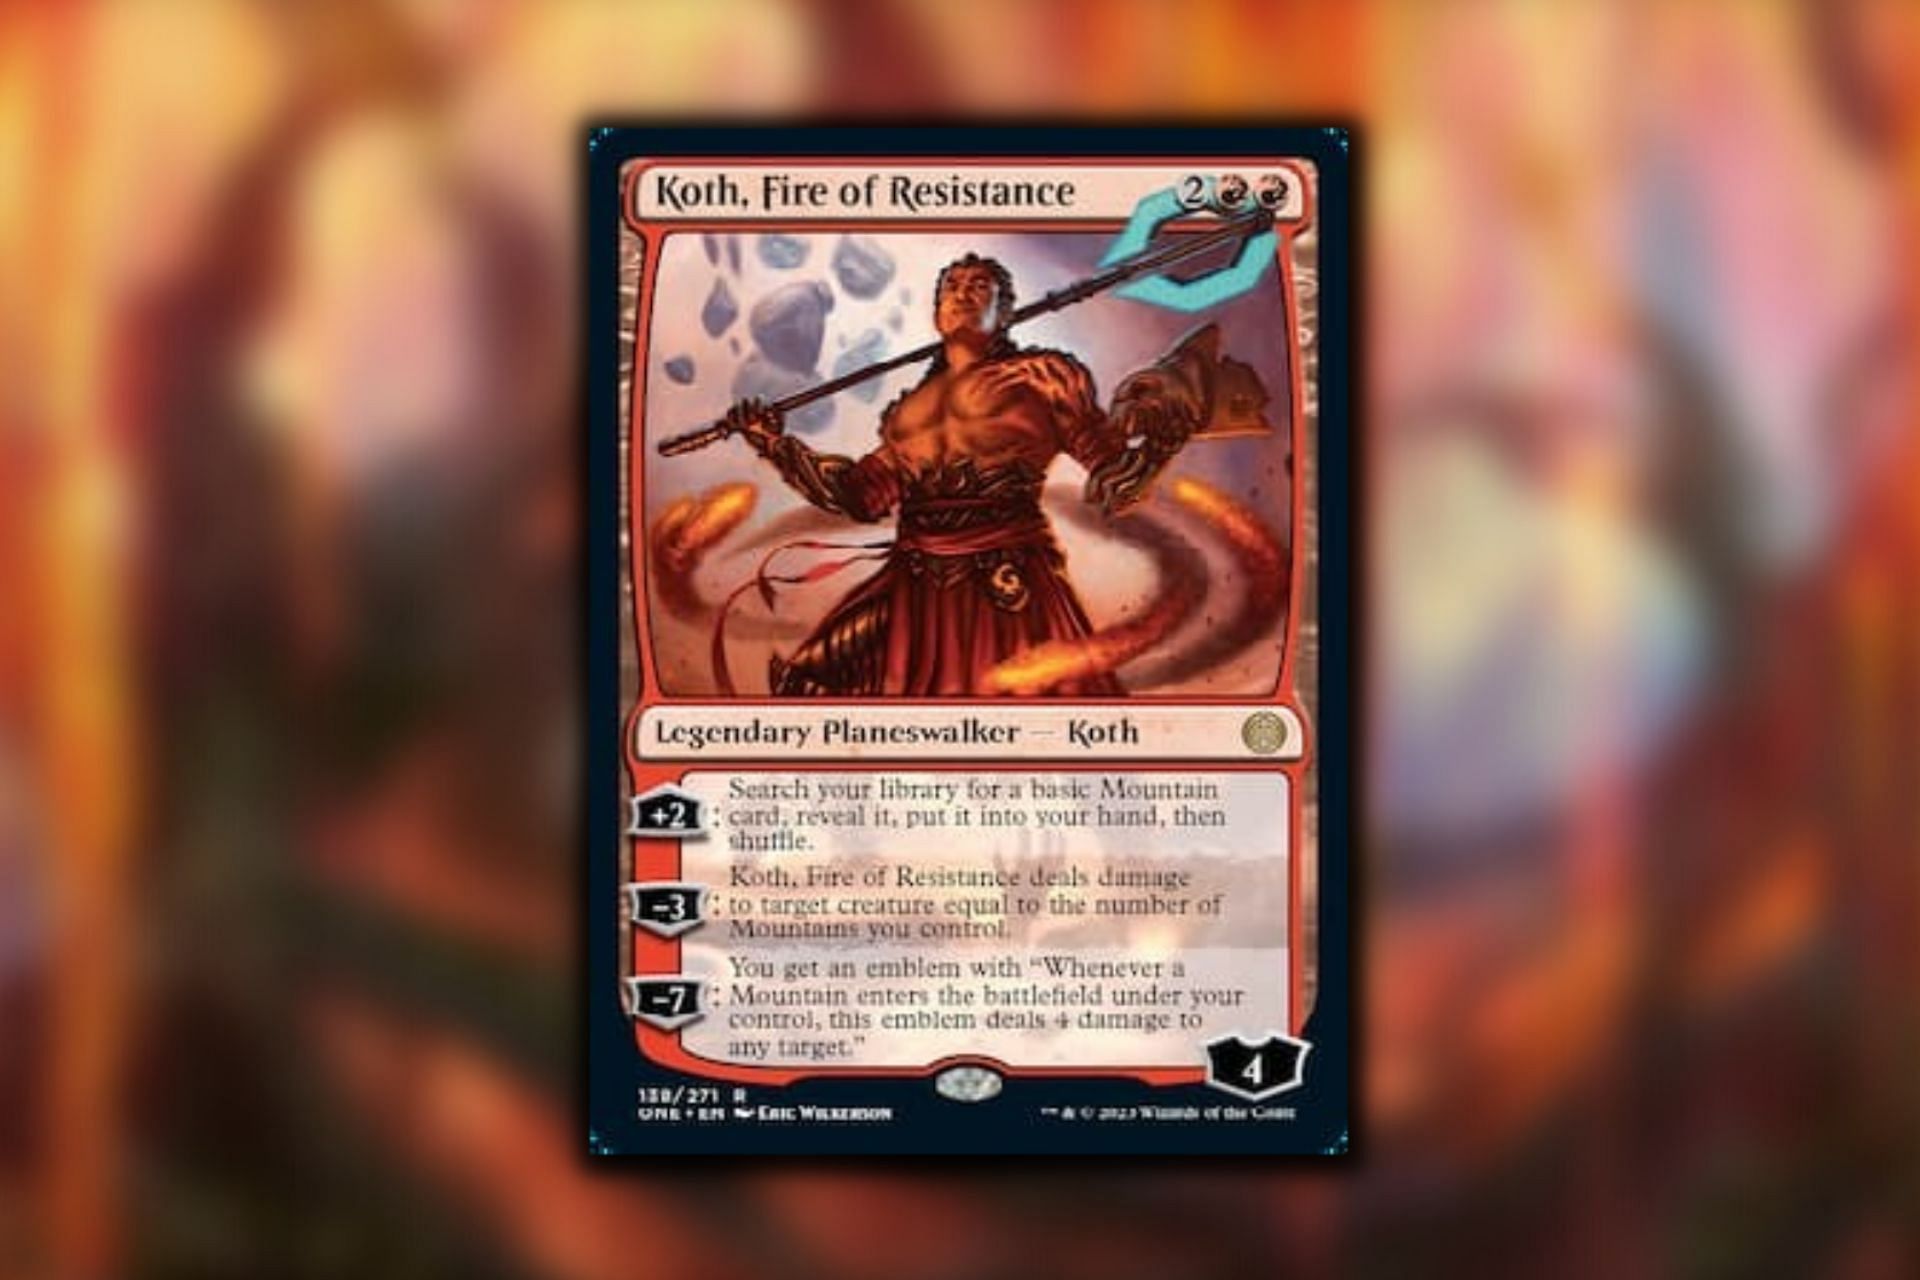 Koth, Fire of Resistance in Magic: The Gathering (Image via Wizards of the Coast)